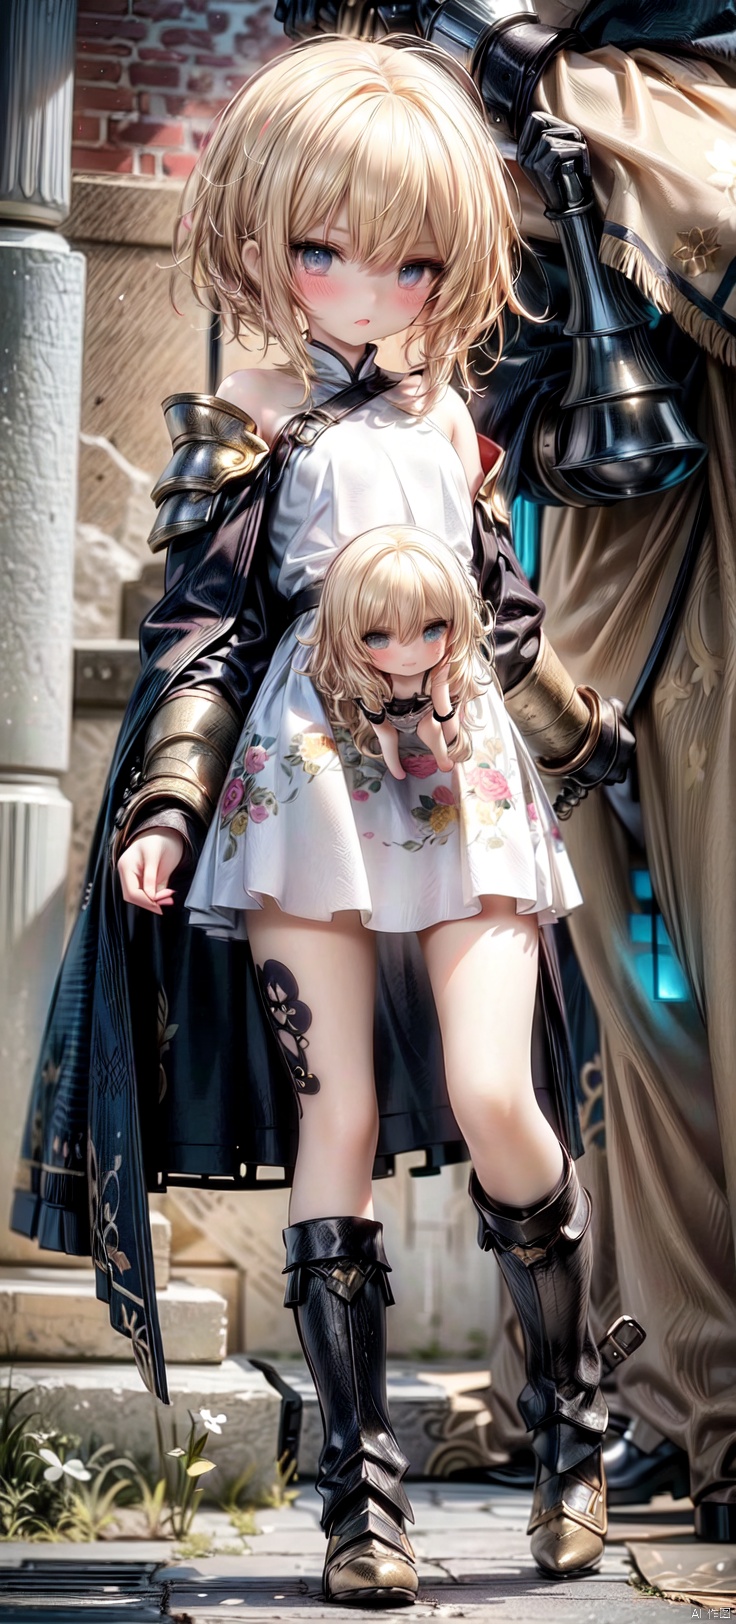  (Full body photo)1 little girl(heat period,oestrus_stand), cute, Petite, loli,flat chested, blonde_long _hair, perfect elegant face, perfect aqua eyes,Opening_Mouth-O_Tongue,Glowing armor(blonde print), metal long sleeves (blonde scalelike), metal boots (blonde scalelike), (blonde) metal armour (blonde scalelike),Metal arm armor(blonde scalelike),Metal shoulder armor(blonde scalelike),A floating cloak,steamy breath,nose blush, Just showing little nipples,,(SLE, mksks style, detailed background, ATD essence), excellent, best aesthetics, latest, best quality, masterpiece, very detailed, very detailed CG super detail, 8k_ wallpaper, illustrations, fine details), : vivid,(science fiction), (extremely intricate), the most beautiful artwork in the world, professional digital art by Ed Blinkey and Atey Ghailan and Jeremy Mann and Greg Rutkowski,